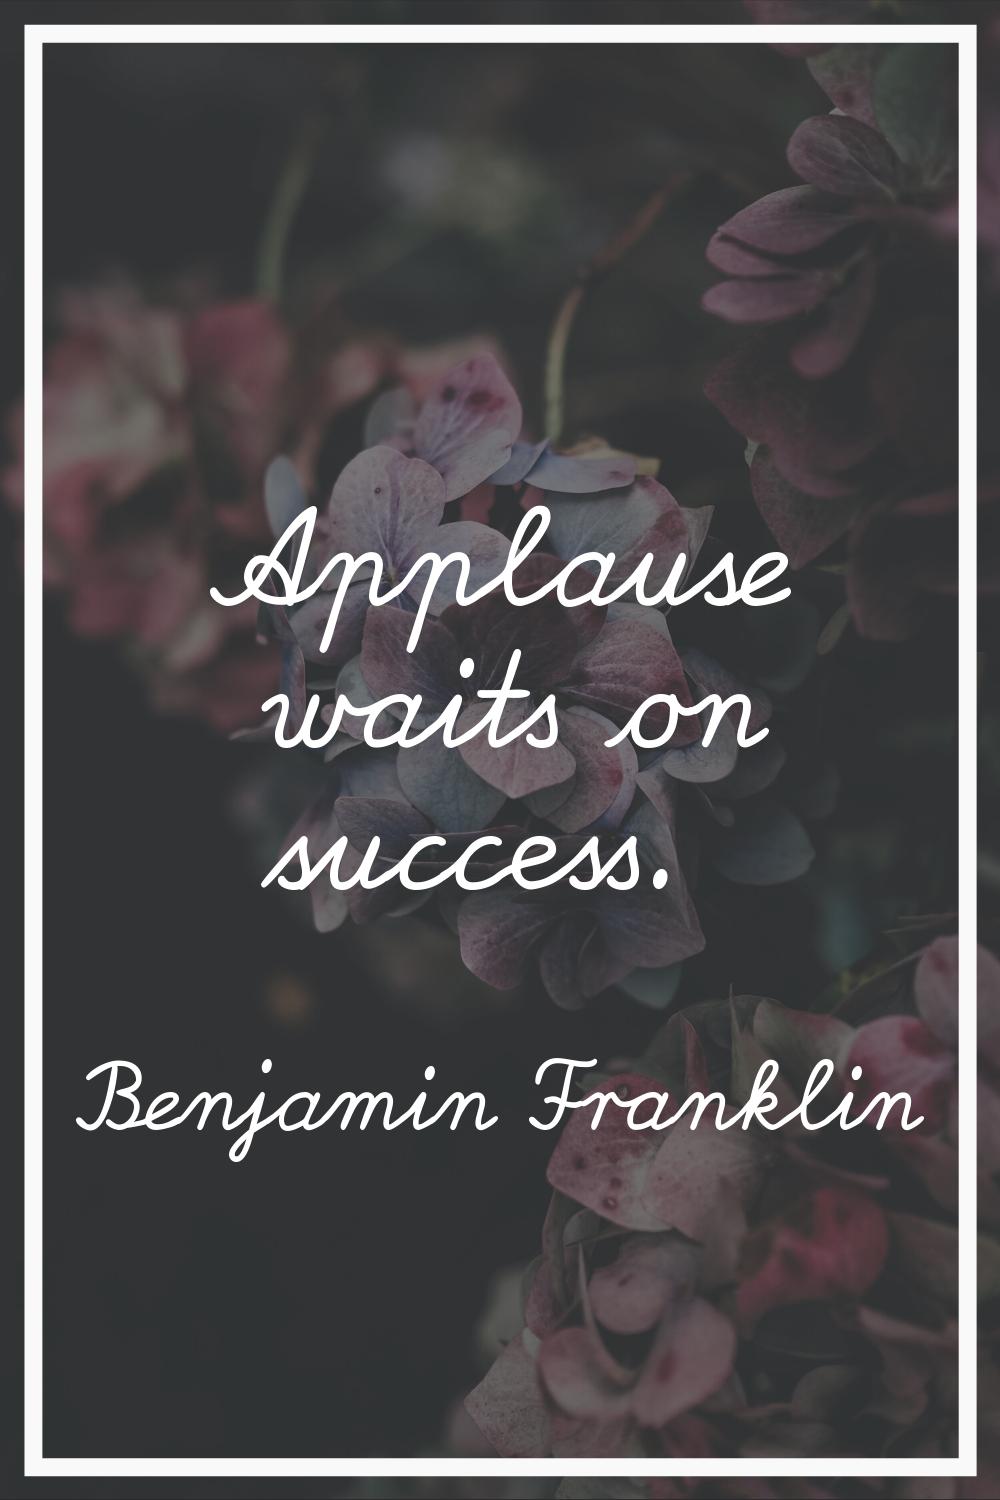 Applause waits on success.